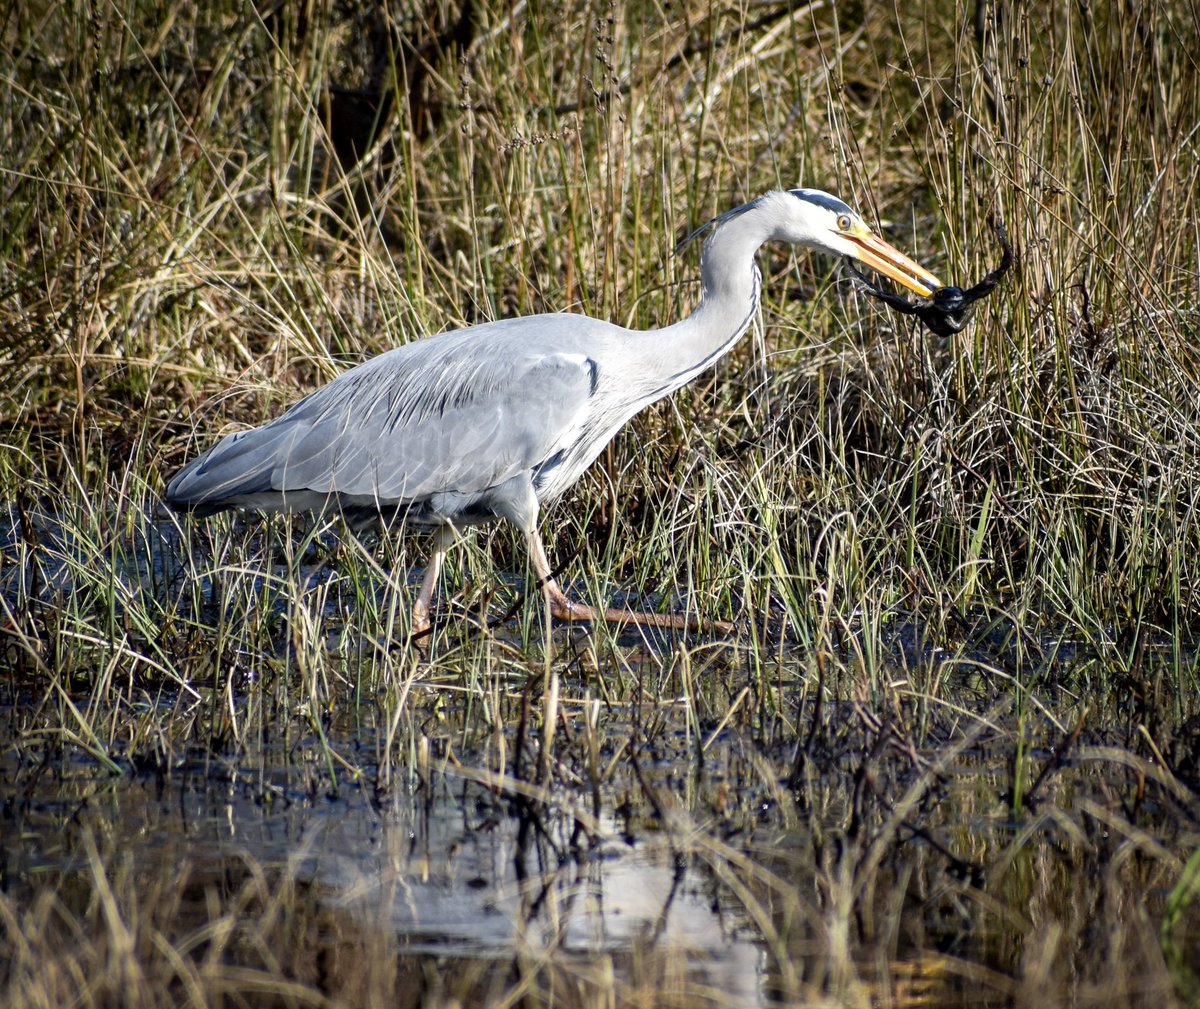 A heron for #WaderWednesday